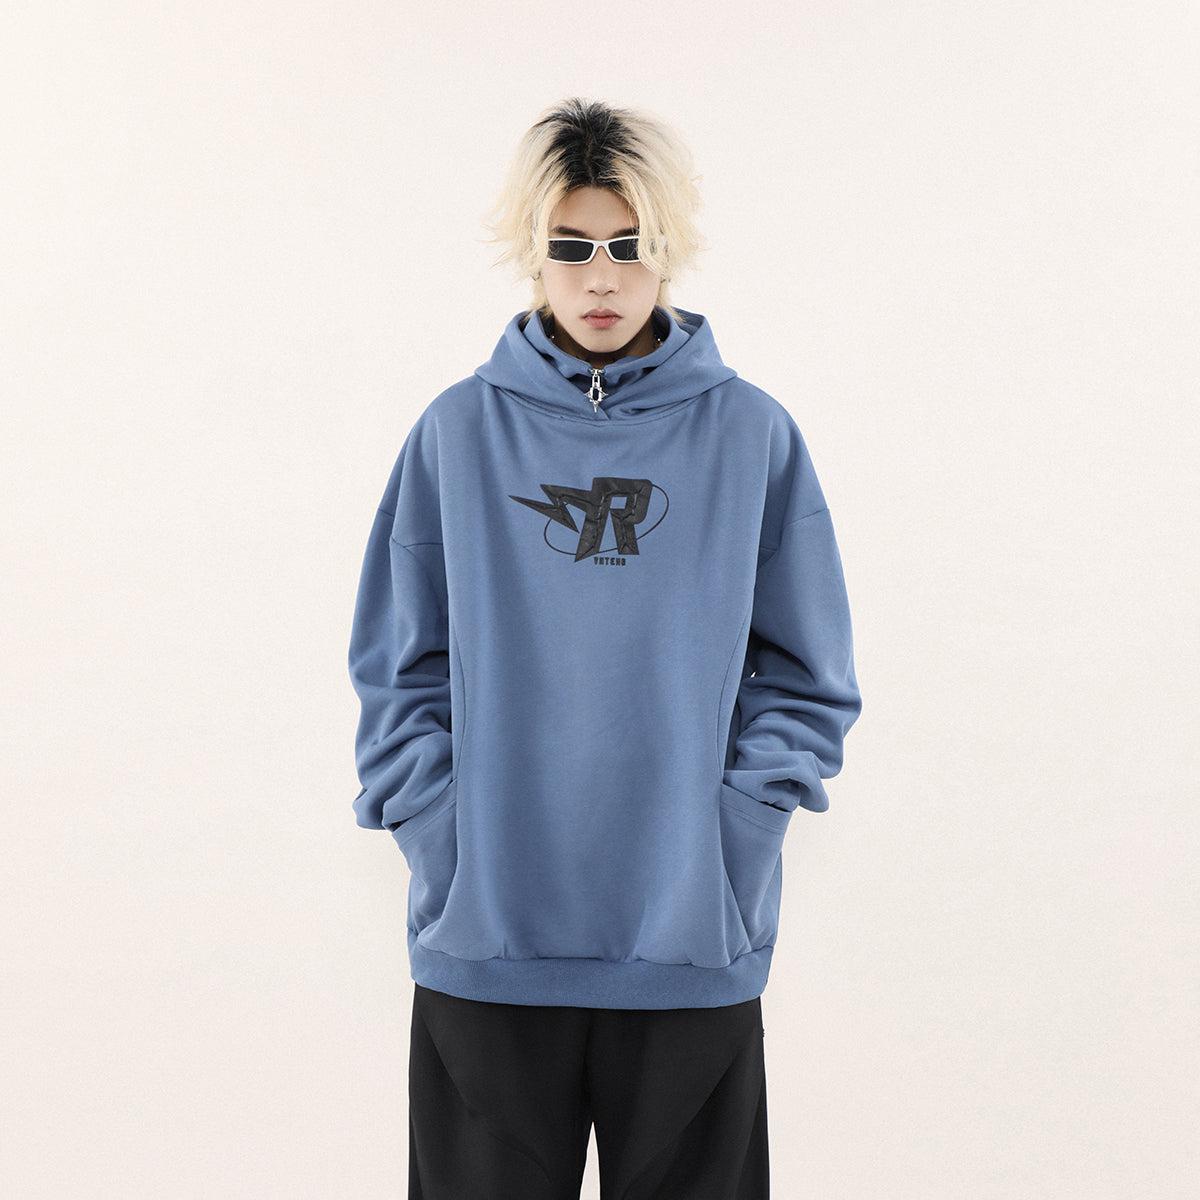 Mr Nearly Logo Text Kangaroo Pocket Hoodie Korean Street Fashion Hoodie By Mr Nearly Shop Online at OH Vault